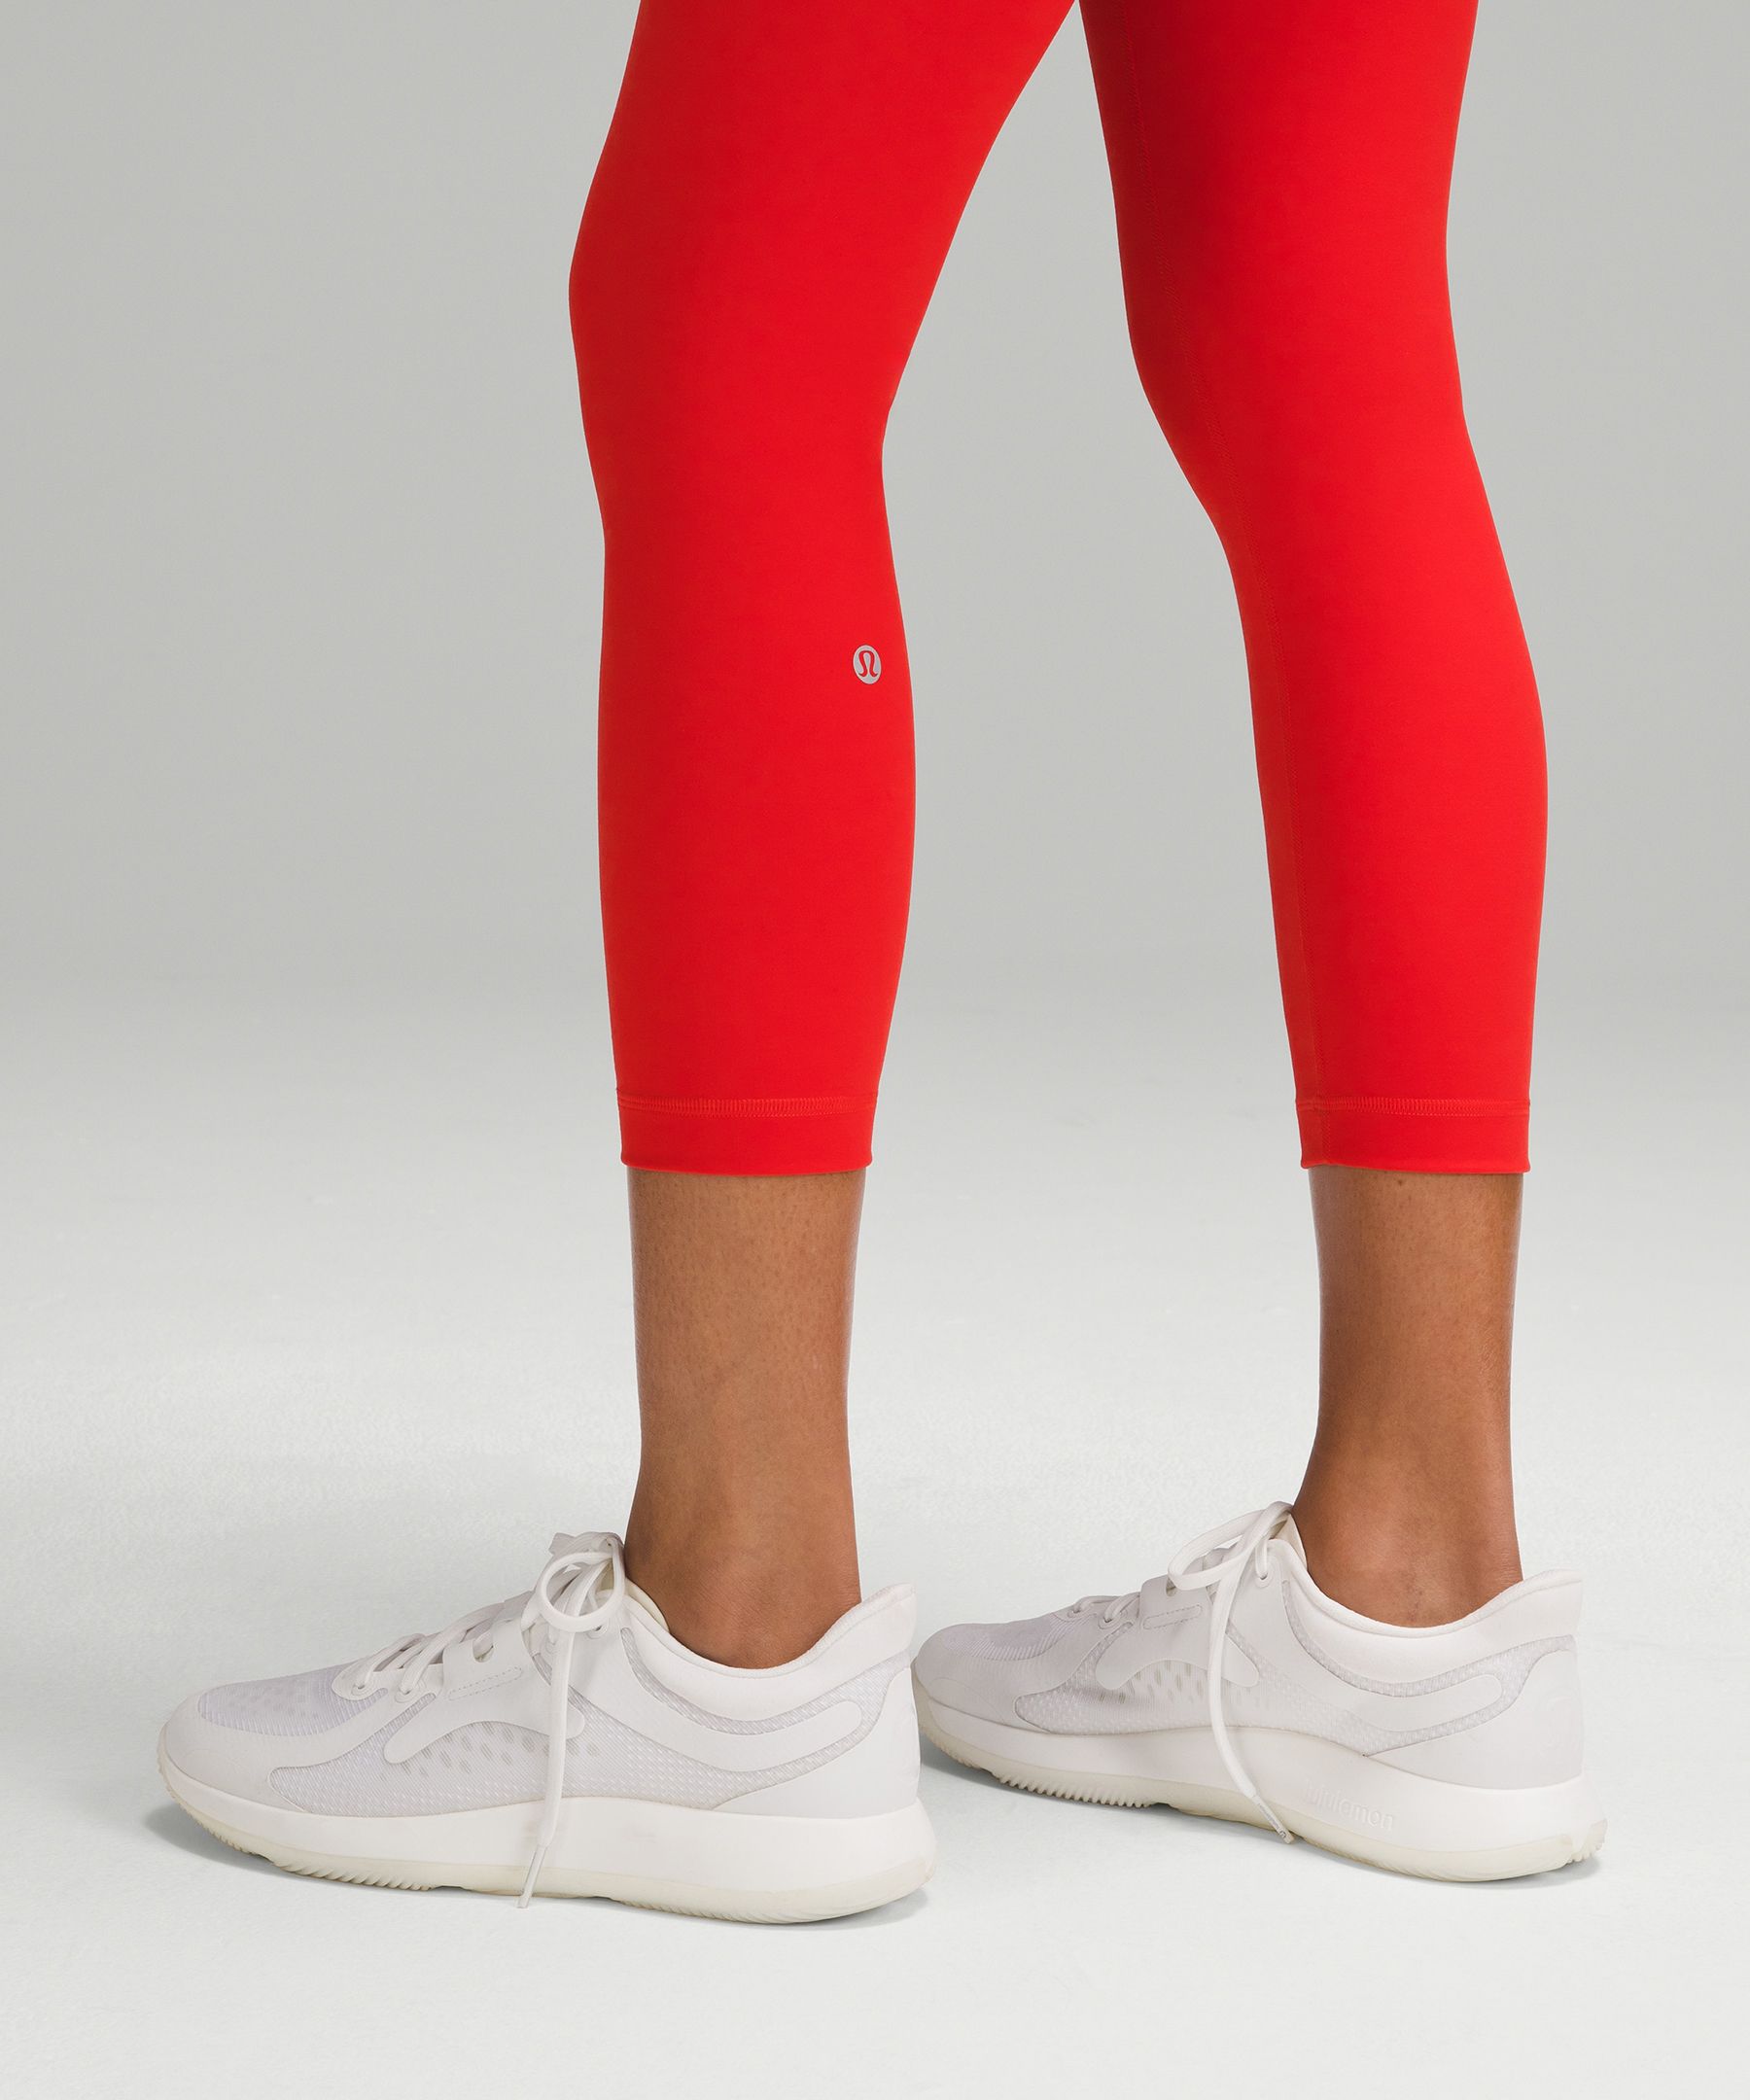 lululemon athletica Wunder Train High-rise Crop Leggings With Pockets - 23  - Color Red/bright Red - Size 10